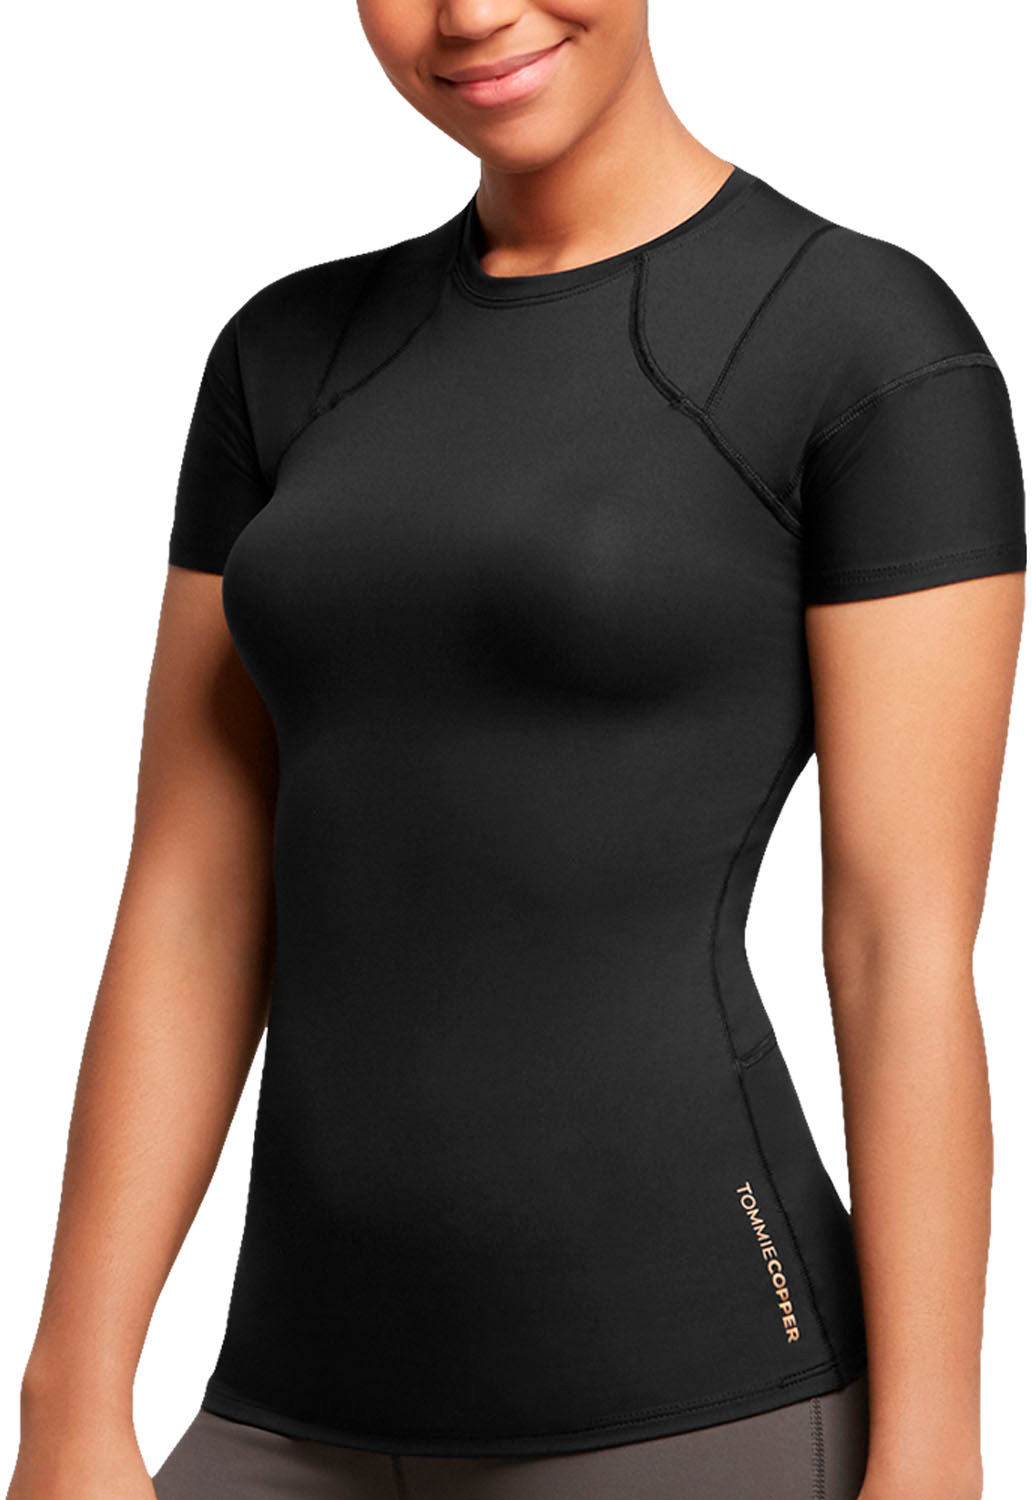 Tommie Copper Women's Compression Shoulder Support Shirt, Grey Ingredients  - CVS Pharmacy